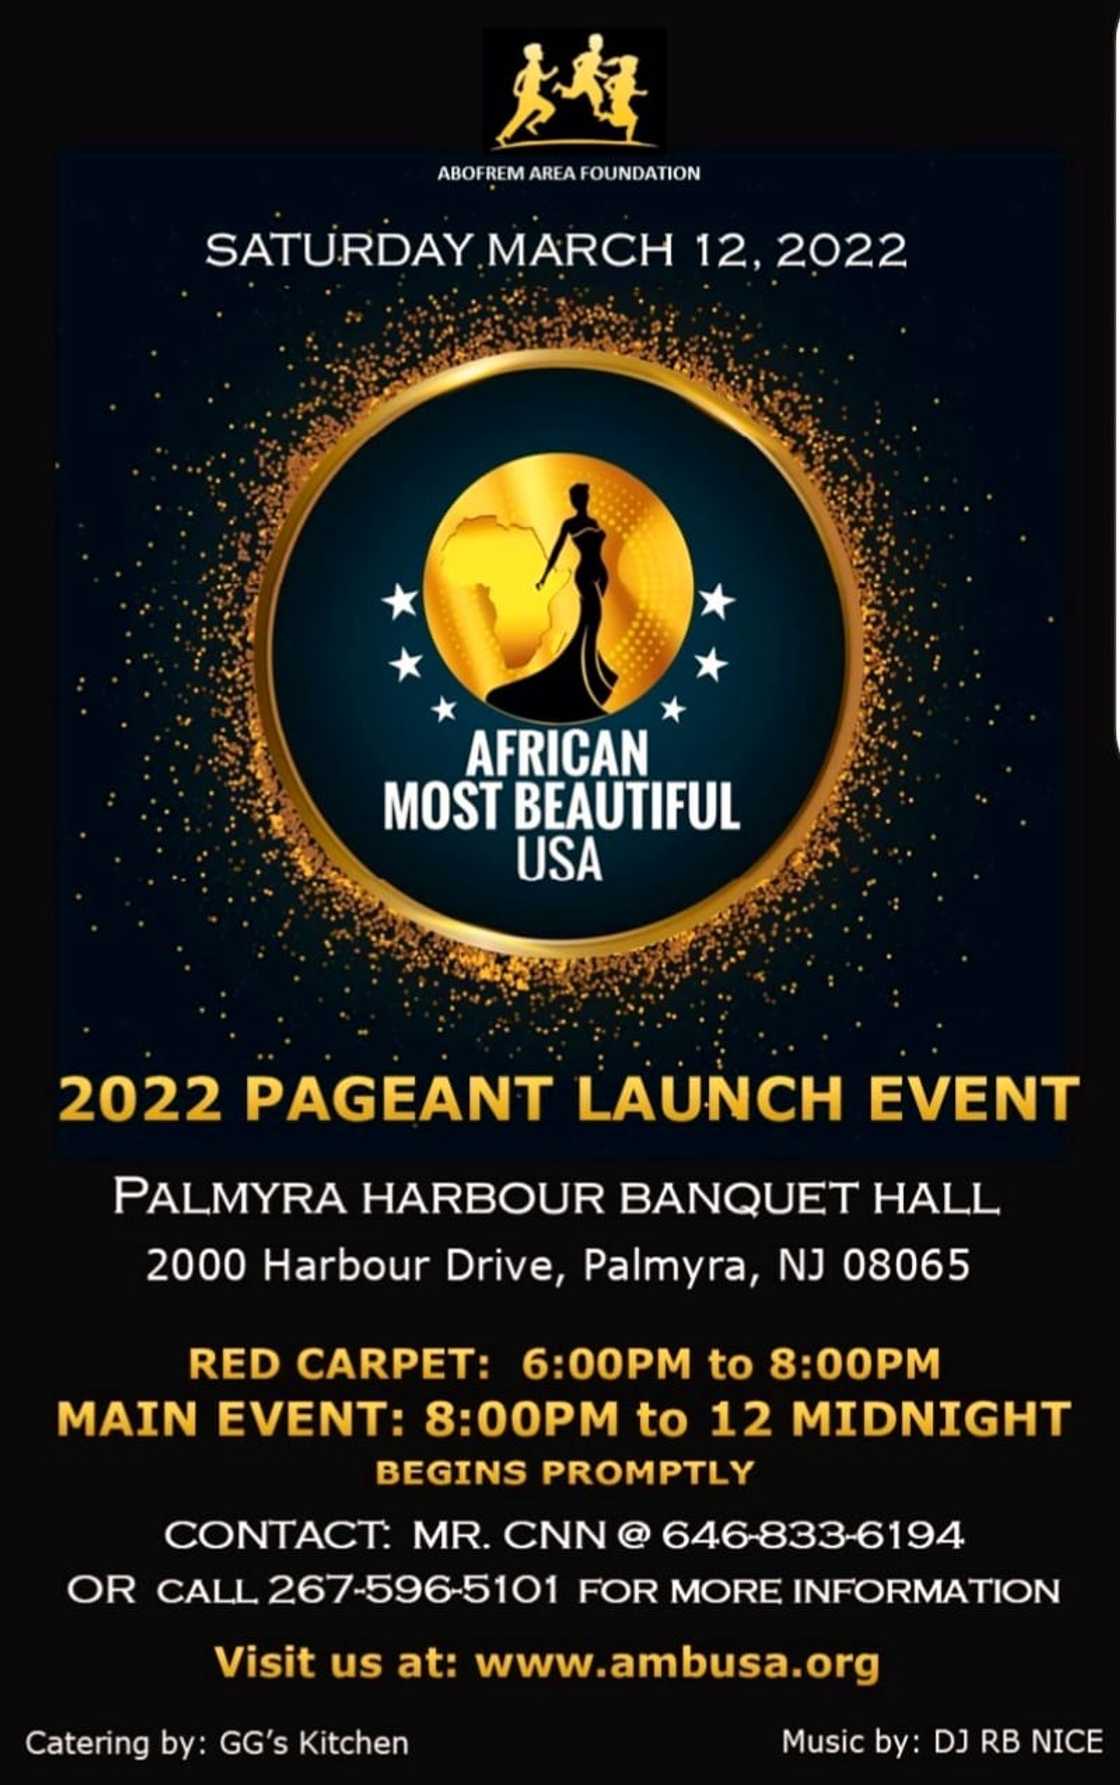 Second edition of African Most Beautiful USA